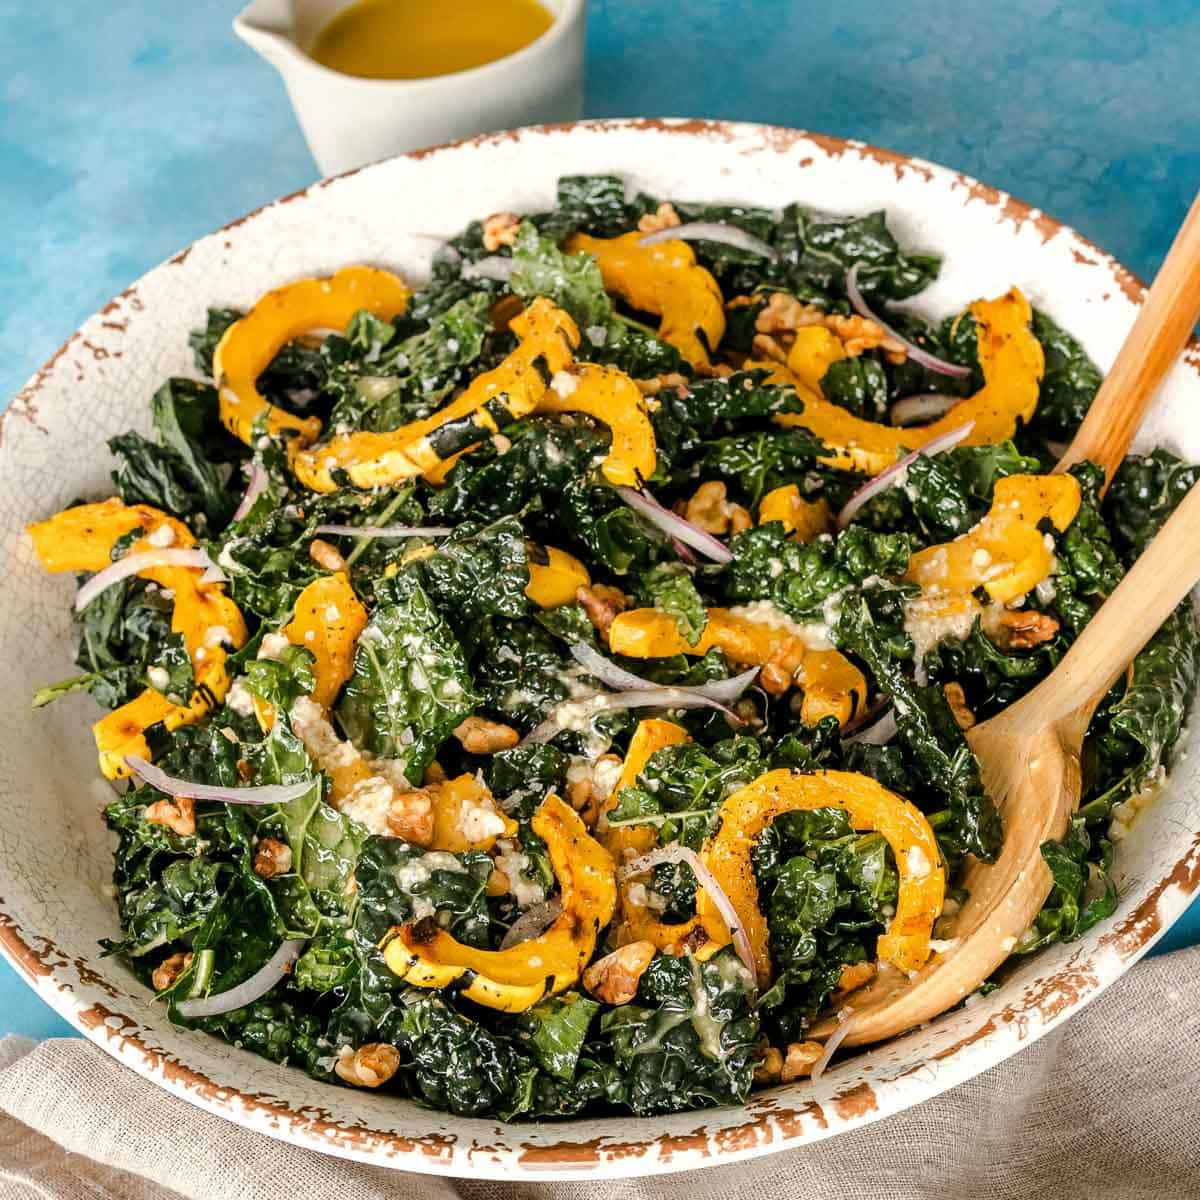 Kale and Delicata Squash salad with red onions in a salad white bowl on a blue counter.